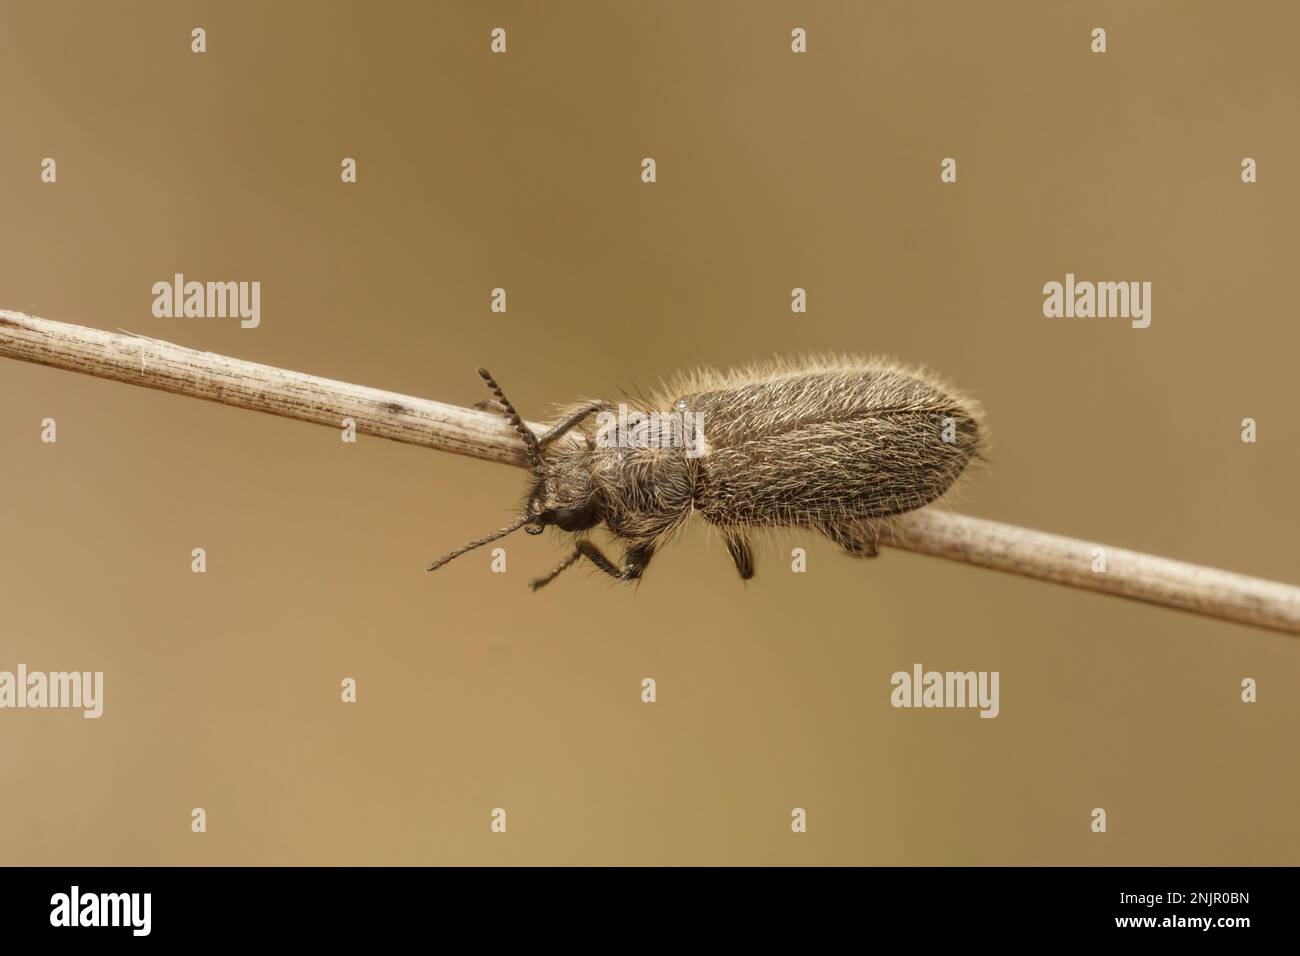 Natural closeup on a hairy Mediterranean Enicopus beetle , hanging on a dried straw Stock Photo